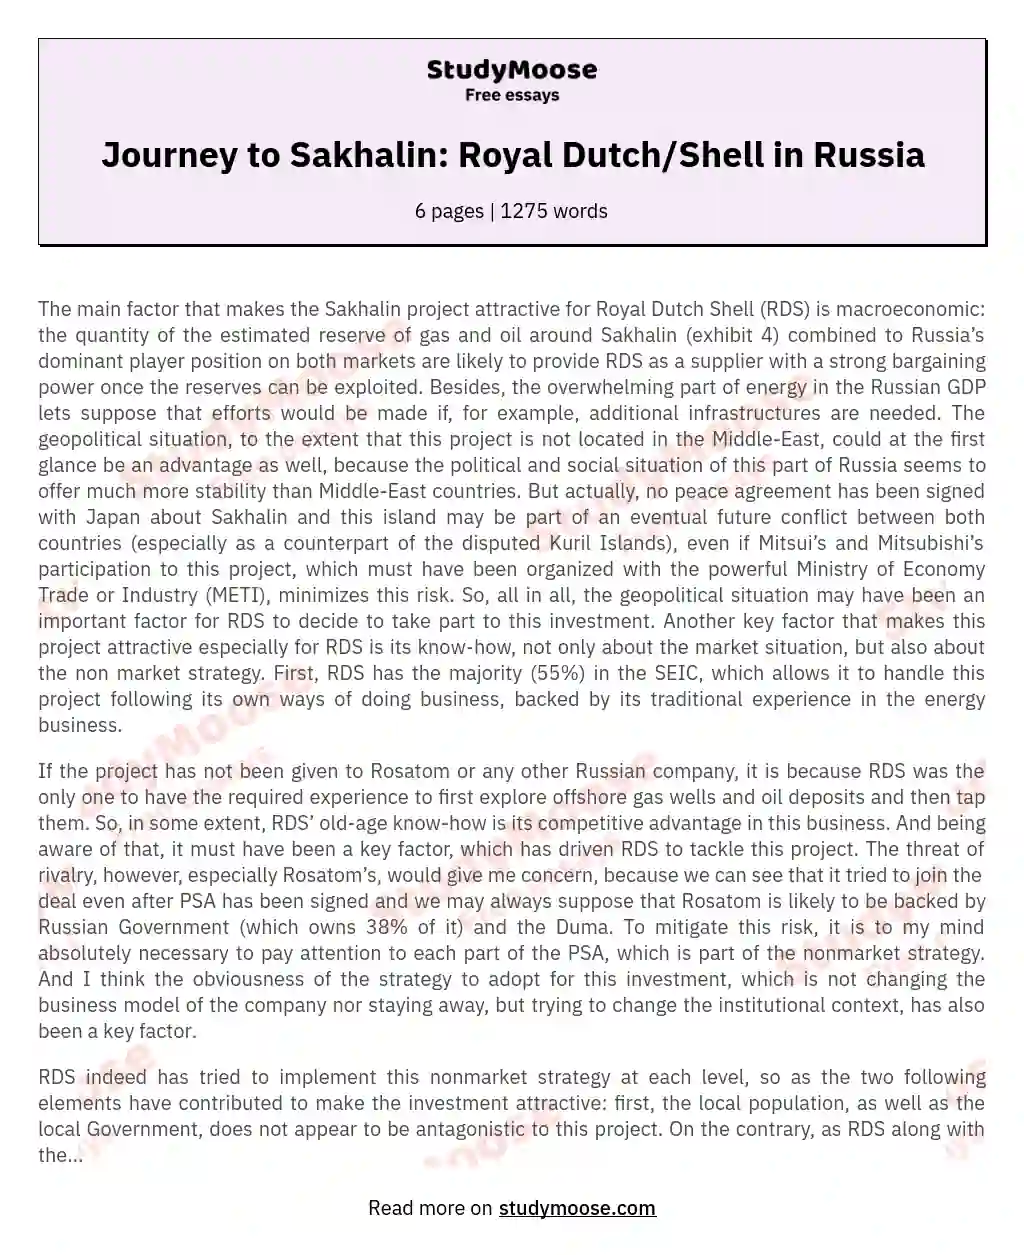 Journey to Sakhalin: Royal Dutch/Shell in Russia essay